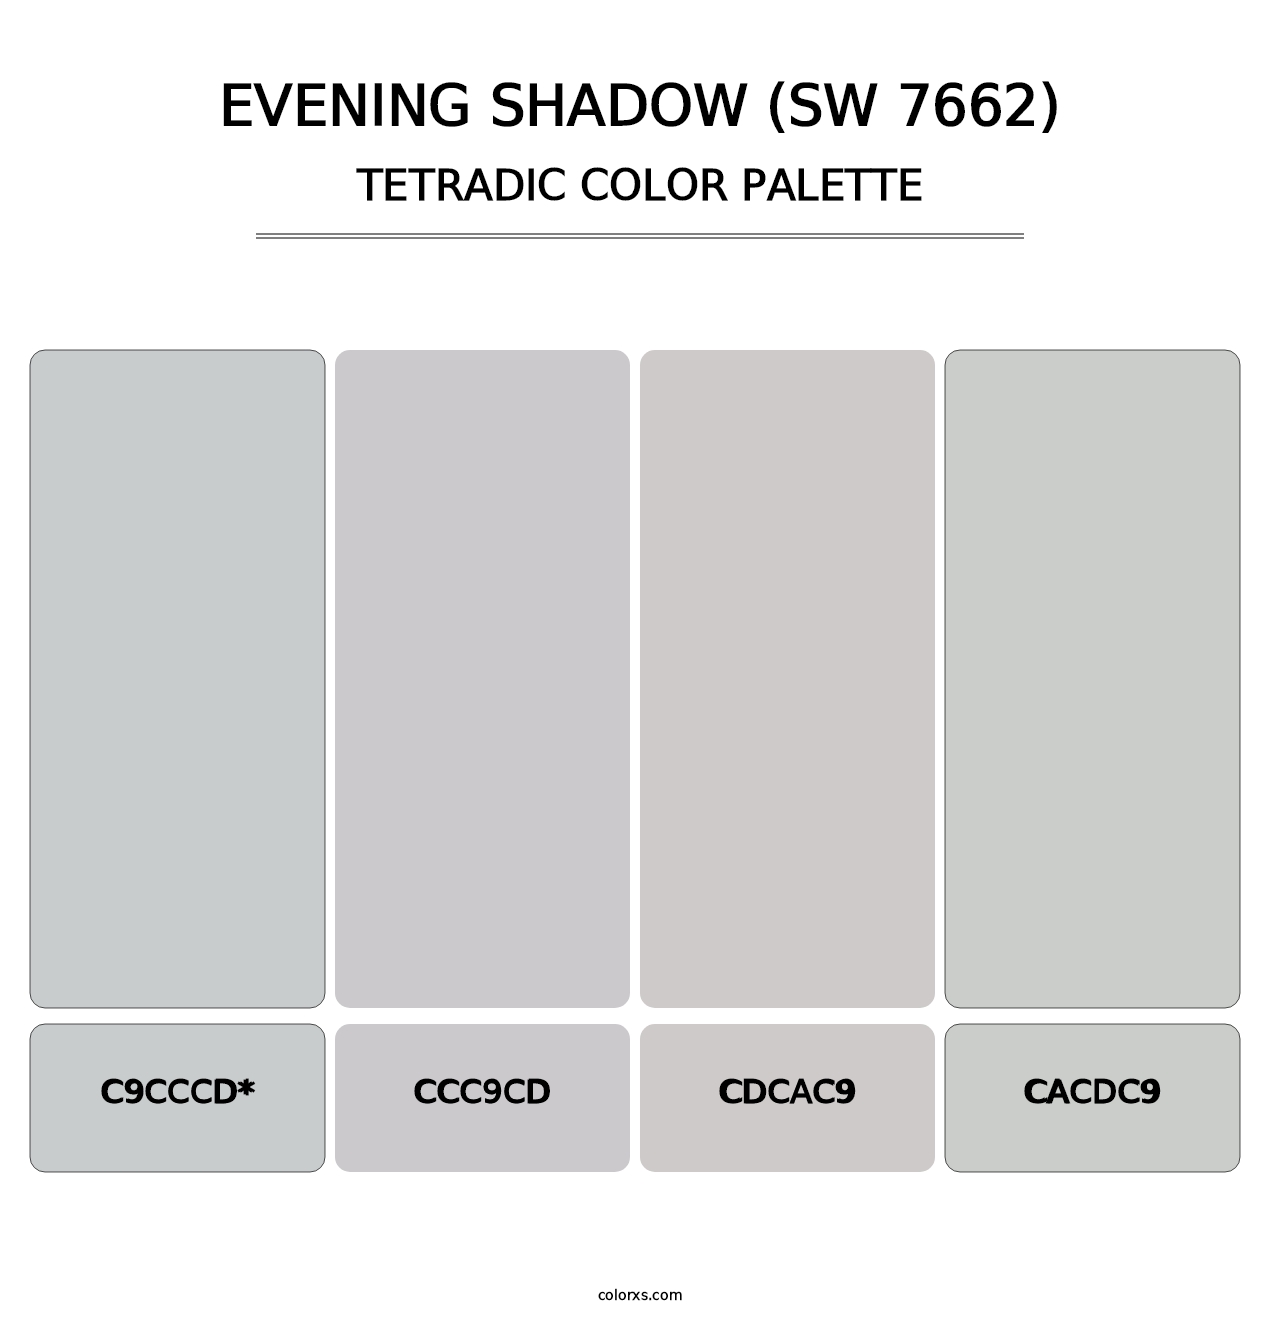 Evening Shadow (SW 7662) - Tetradic Color Palette